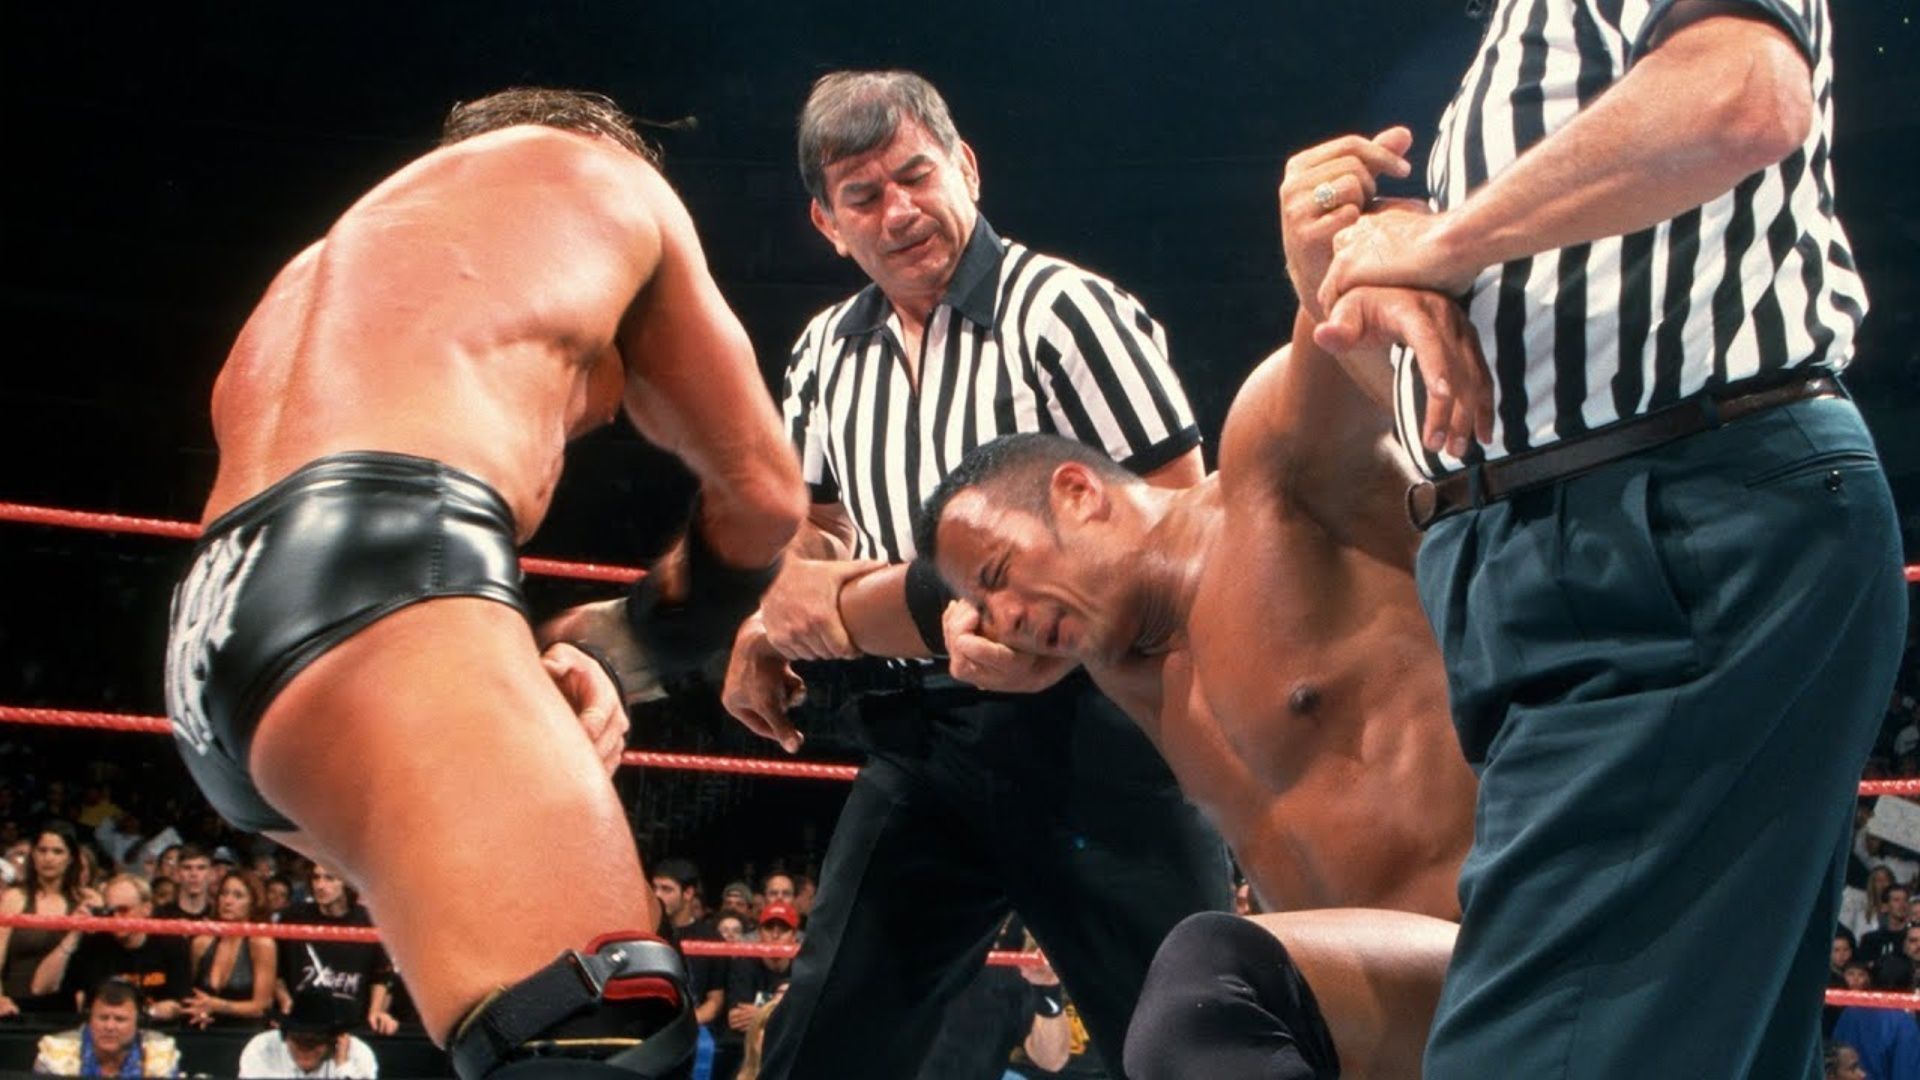 Triple H and The Rock had an awesome match at WWE Backlash 2000.